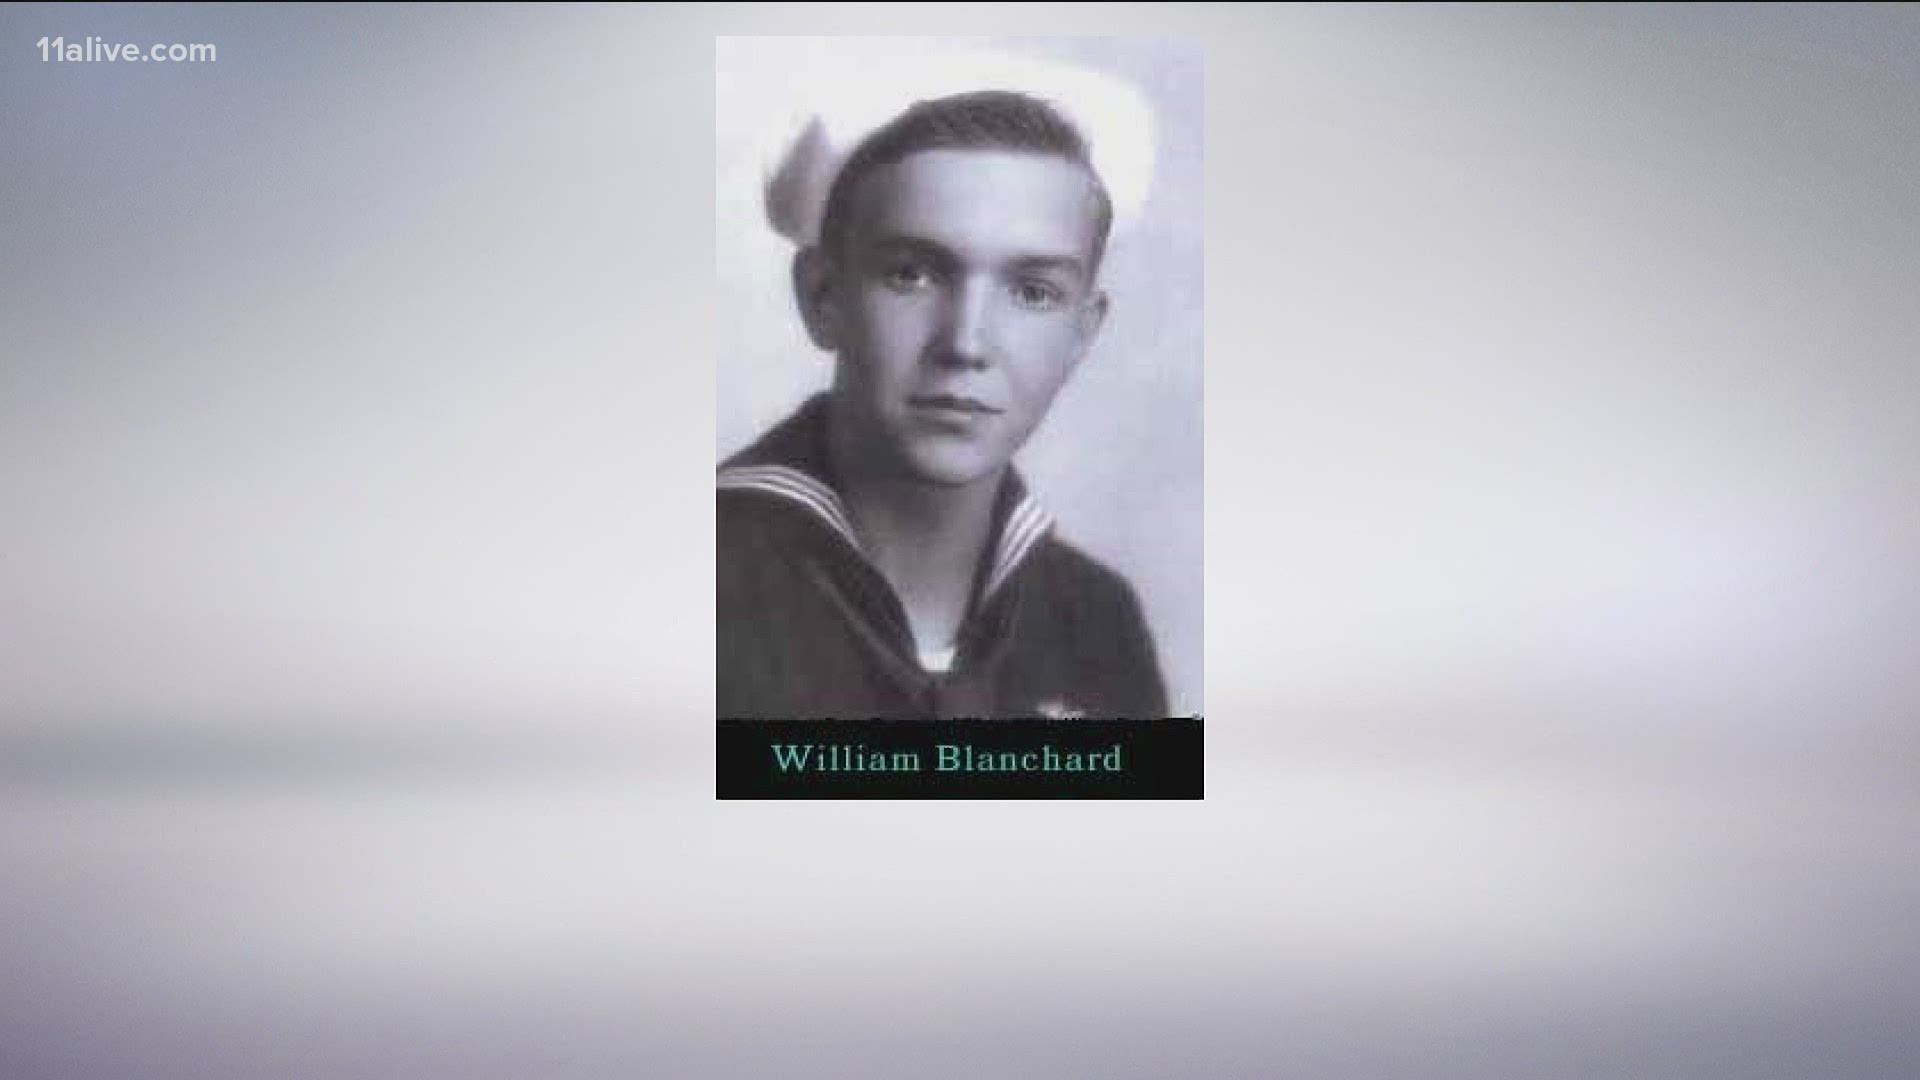 William E. Blanchard of Tignall, Ga. was accounted for in January, according to the Defense POW/MIA Accounting Agency.